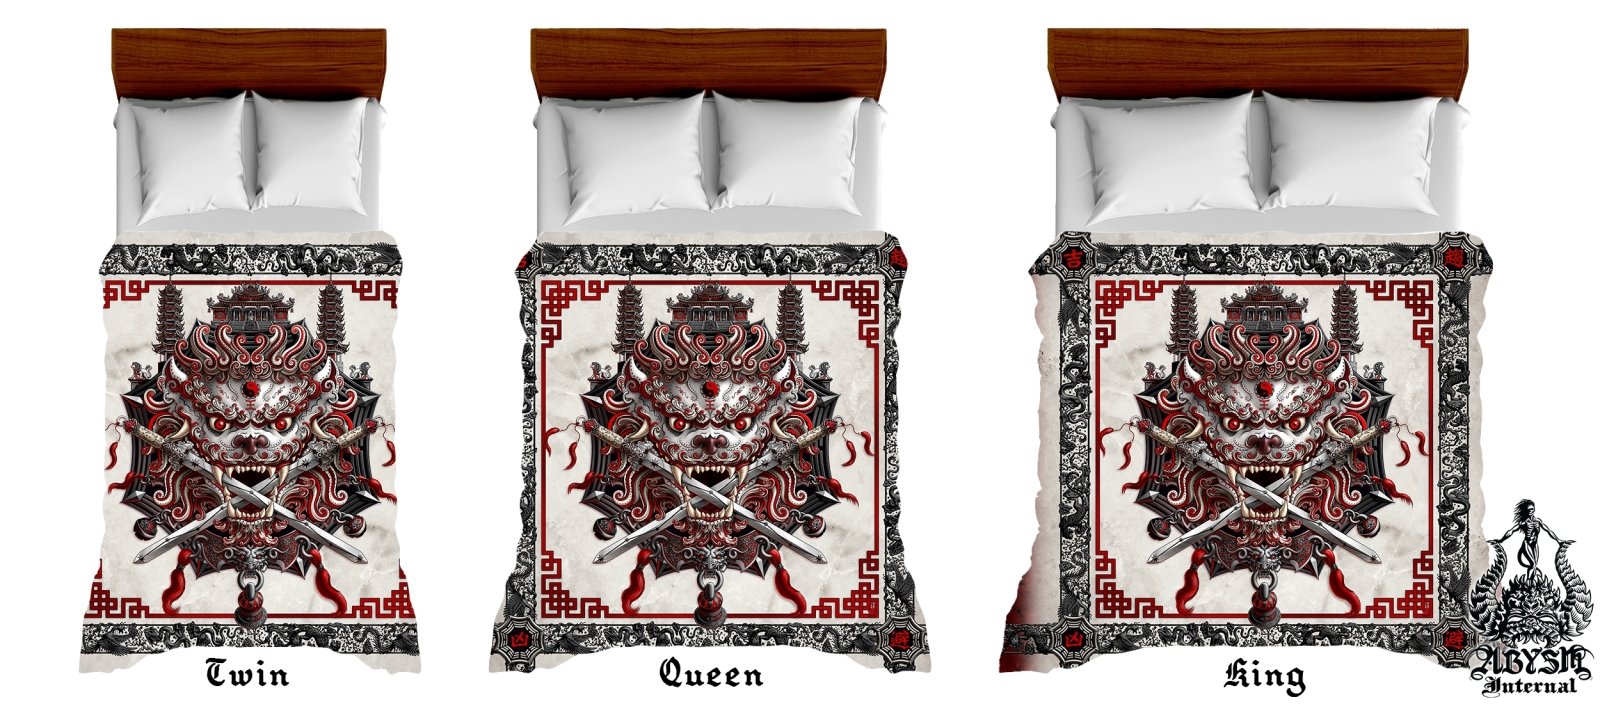 Asian Lion Bedding Set, Comforter and Duvet, Taiwan Sword Lion, Chinese Bed Cover, Gamer Bedroom, Alternative Decor, King, Queen and Twin Size - Bloody White Goth - Abysm Internal